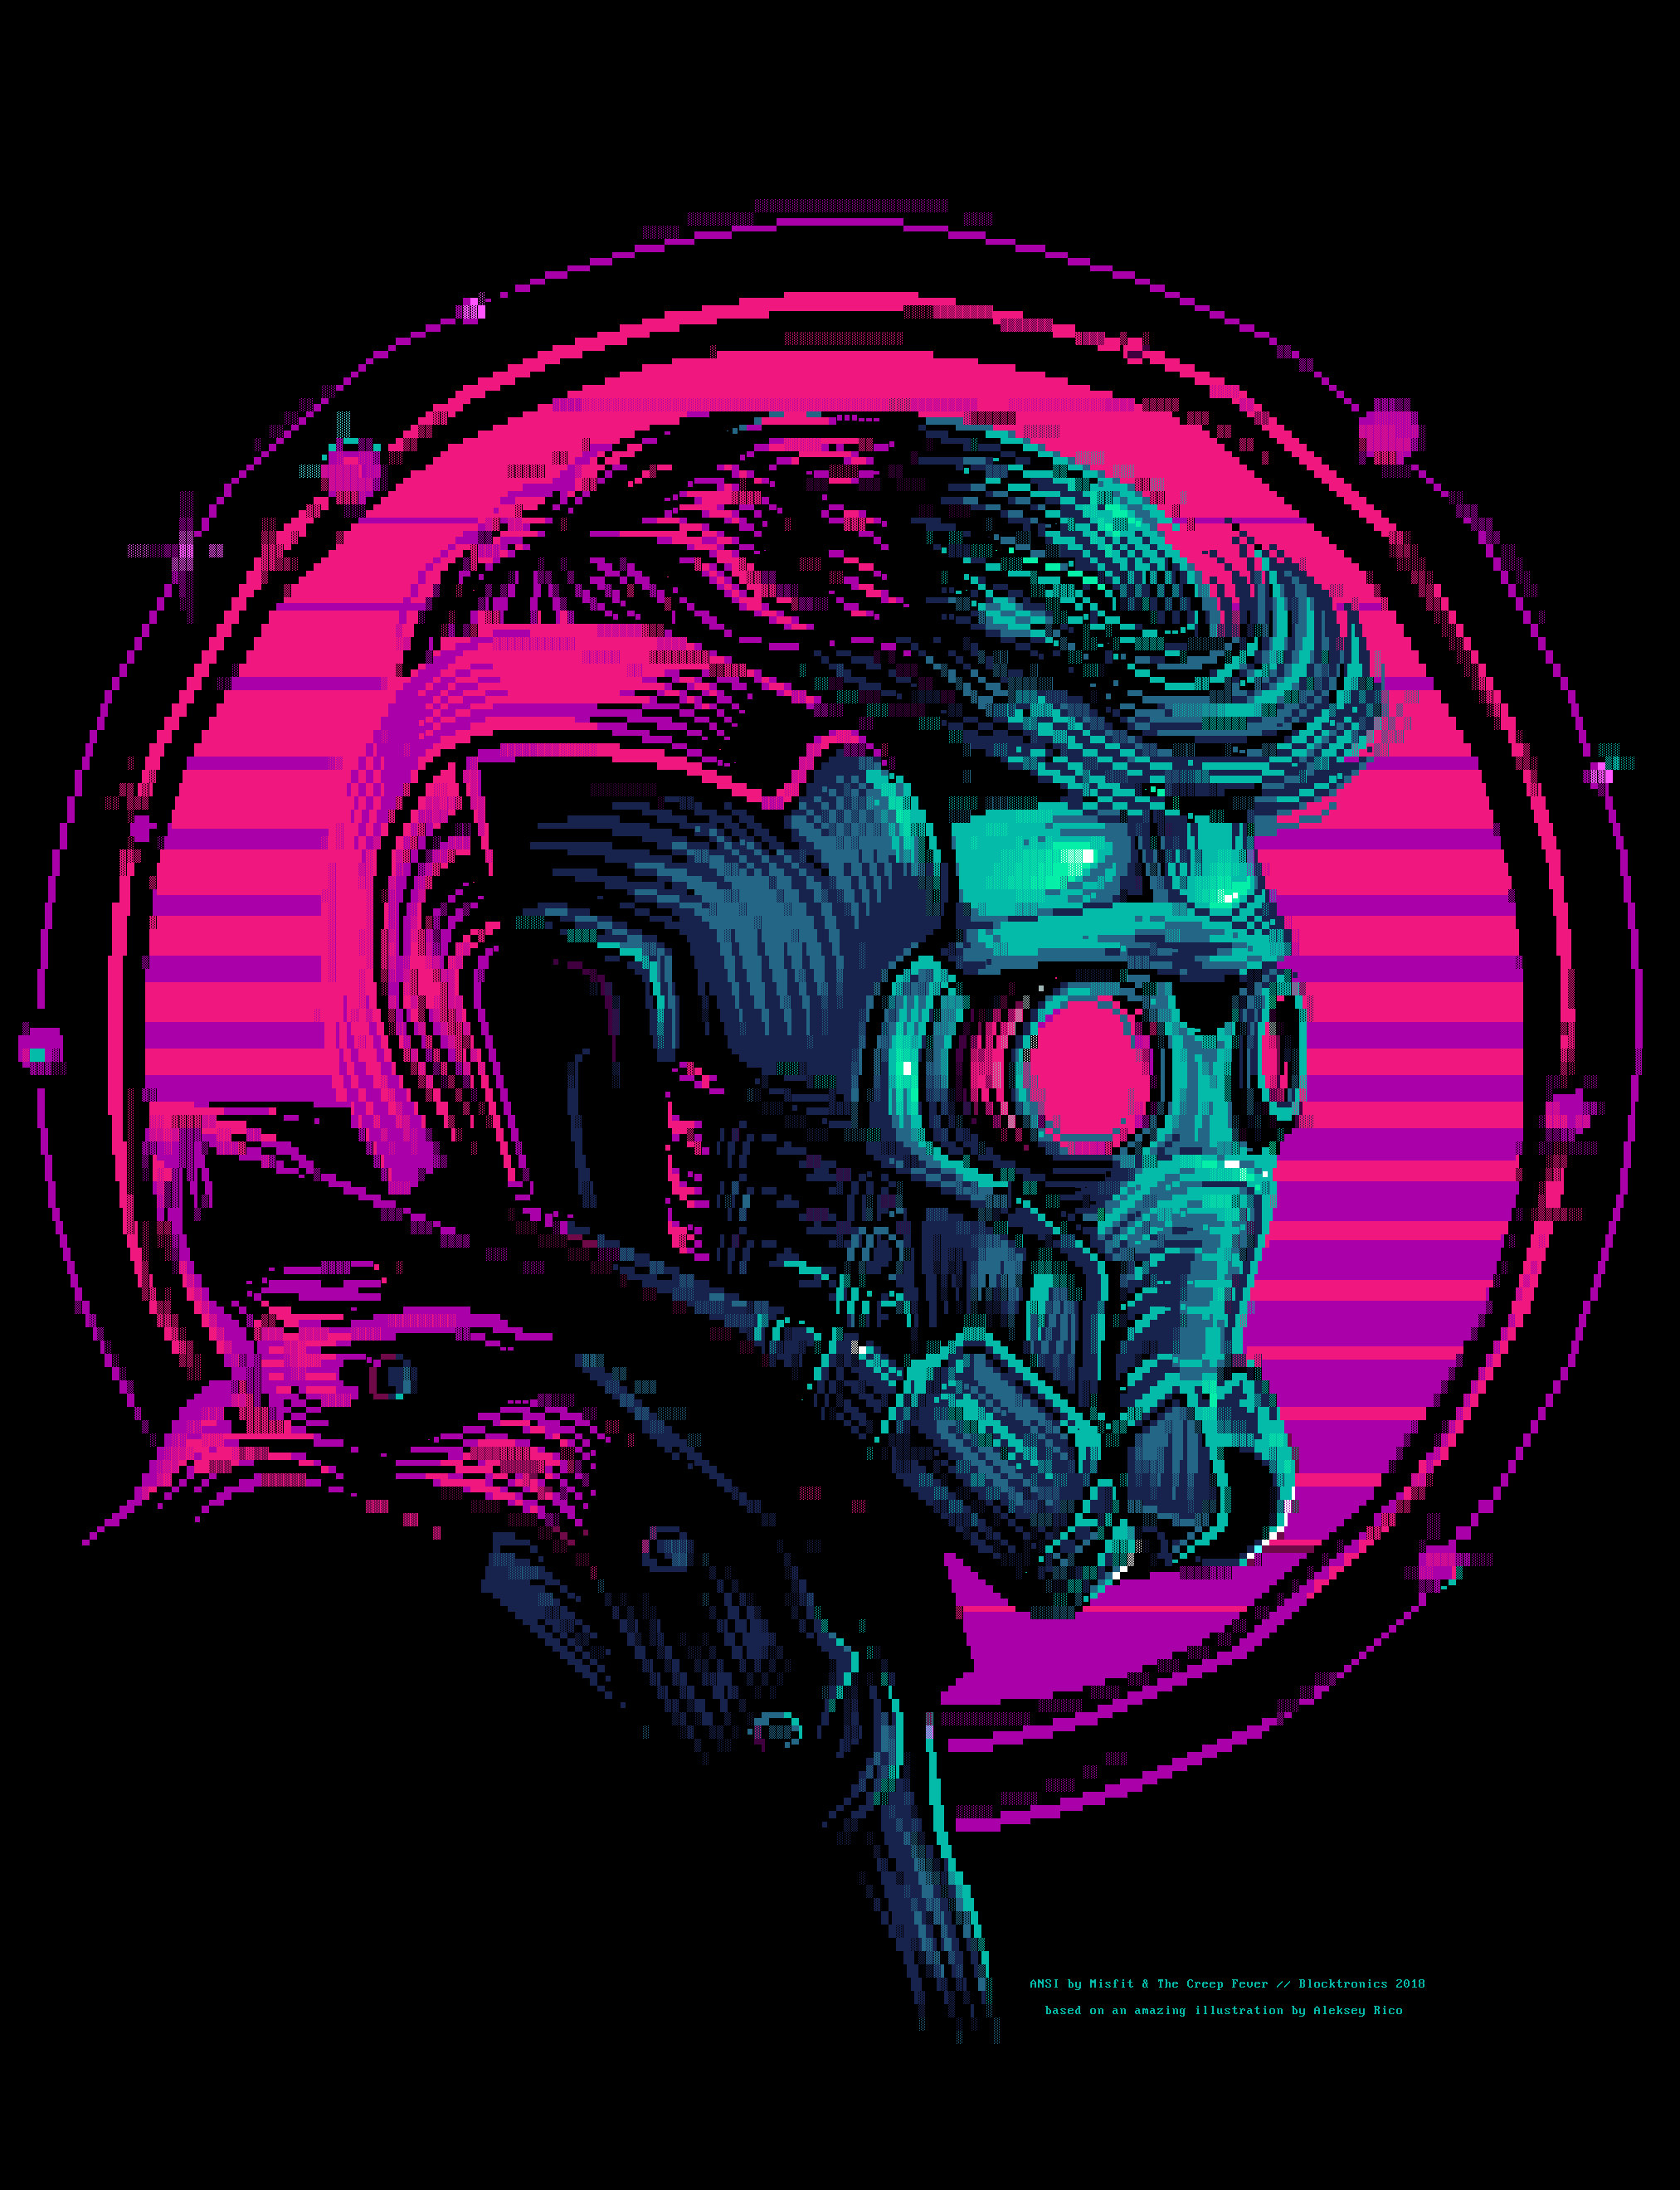 Starlord by Misfit & TCF